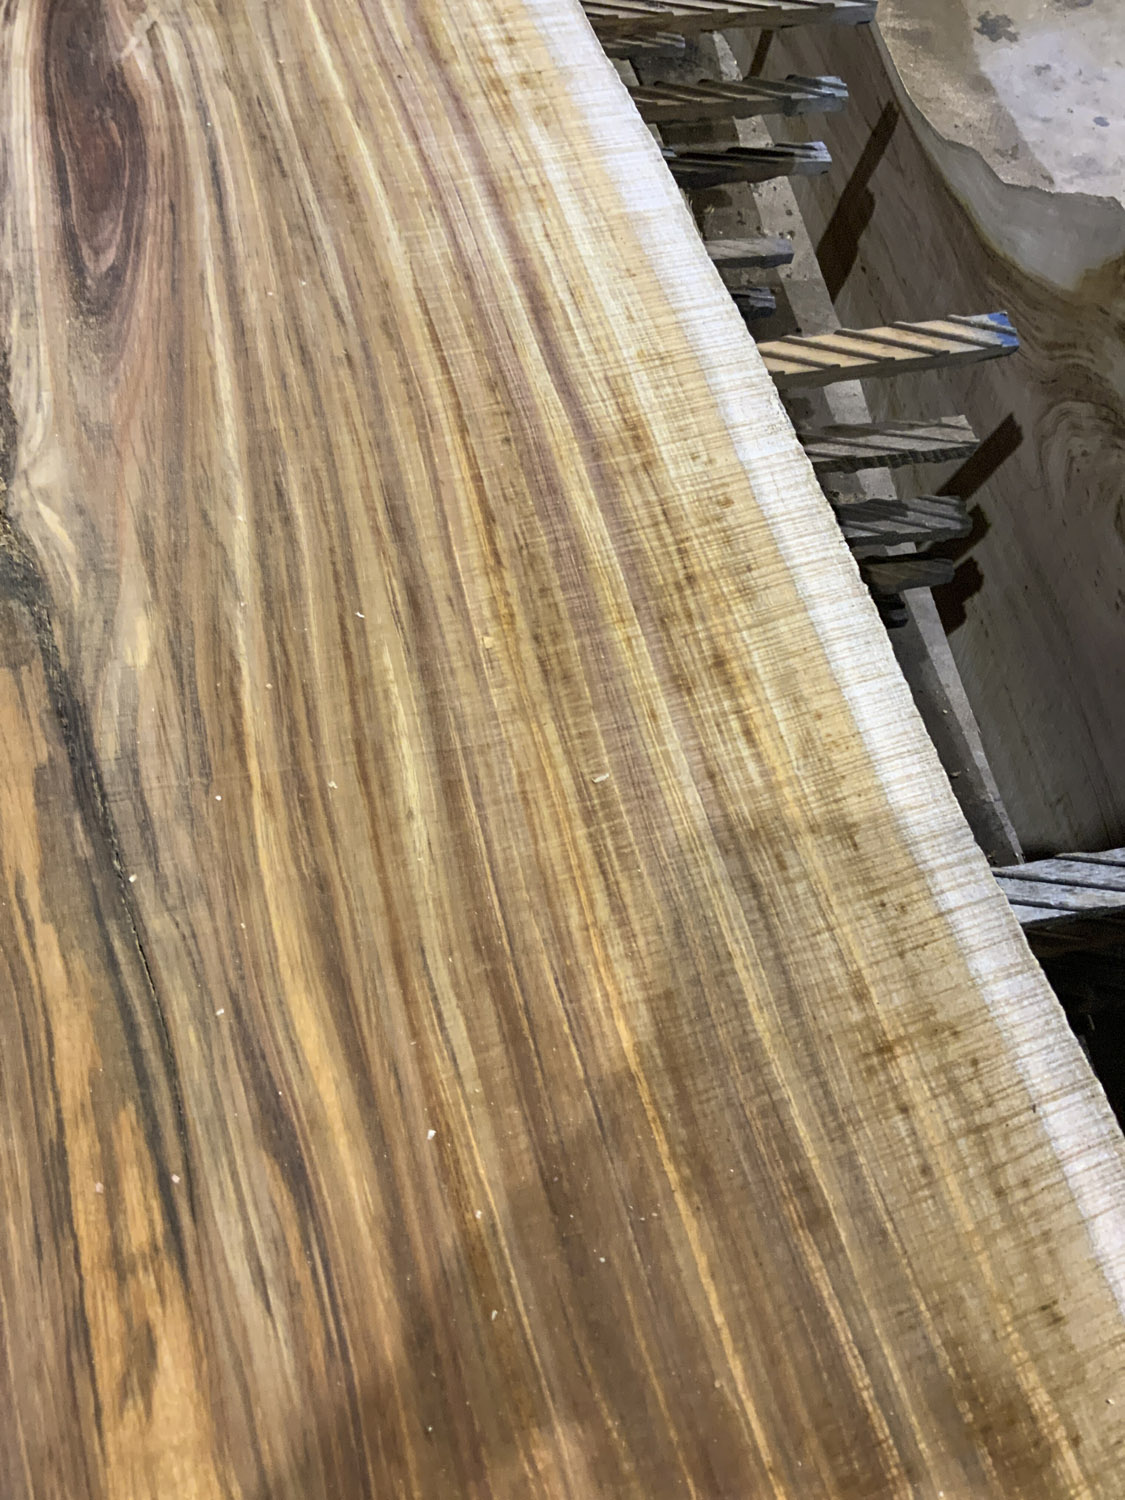 Some pretty things have passed through the sawmill this past month- Black Walnut, Big Leaf Maple, Tasmanian Blackwood, Eucalyptus.... Please keep in mind that this material is green/ drying